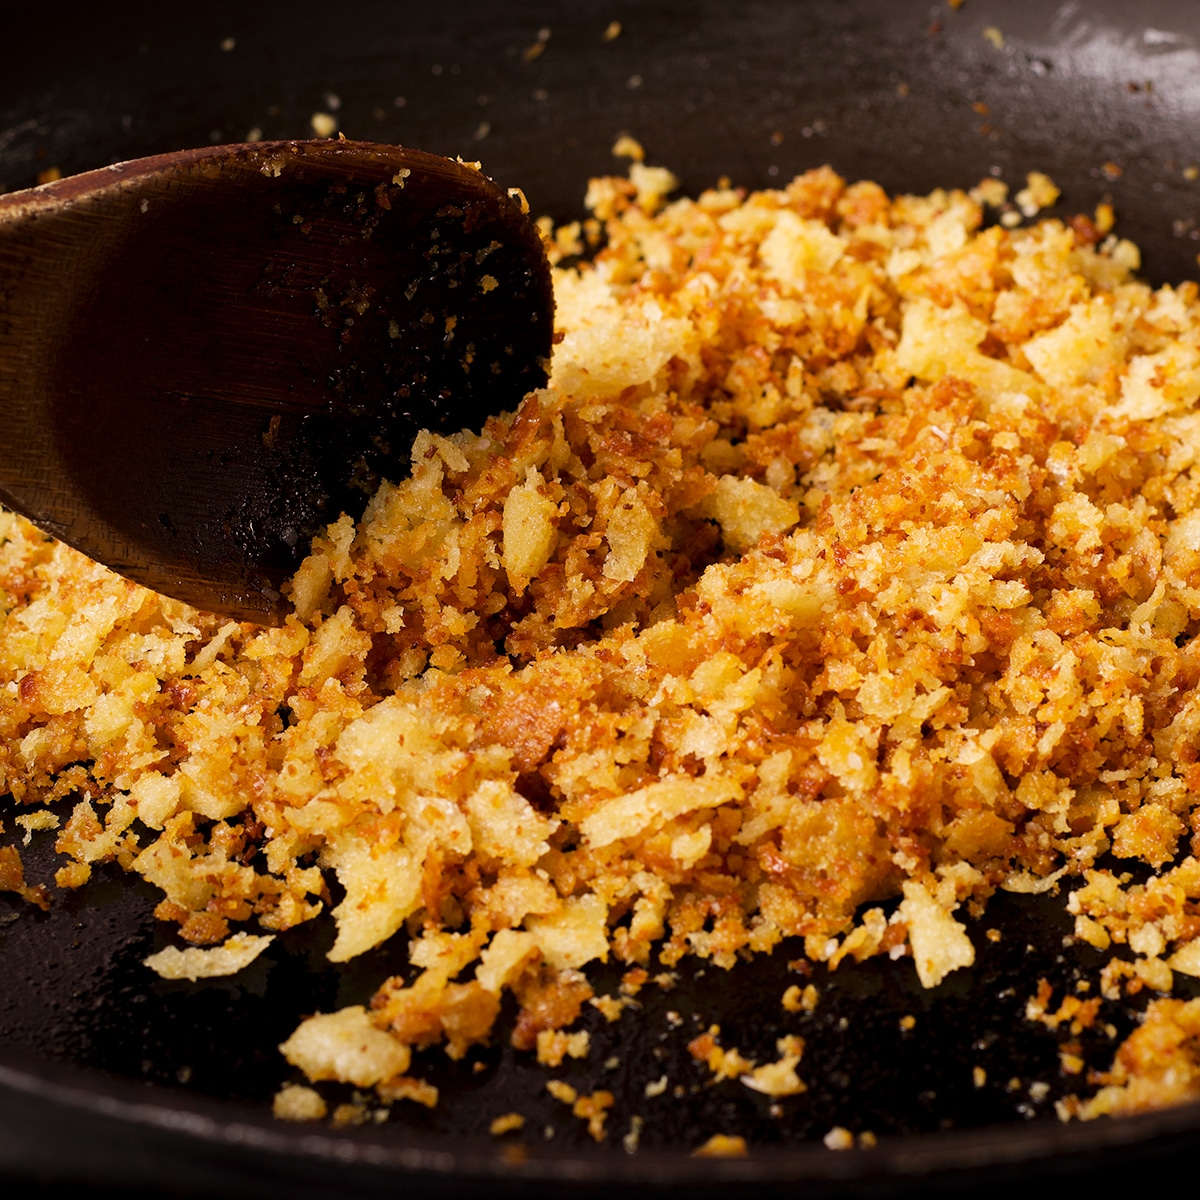 Bread crumbs cooking in a skillet until they are golden brown and crispy.